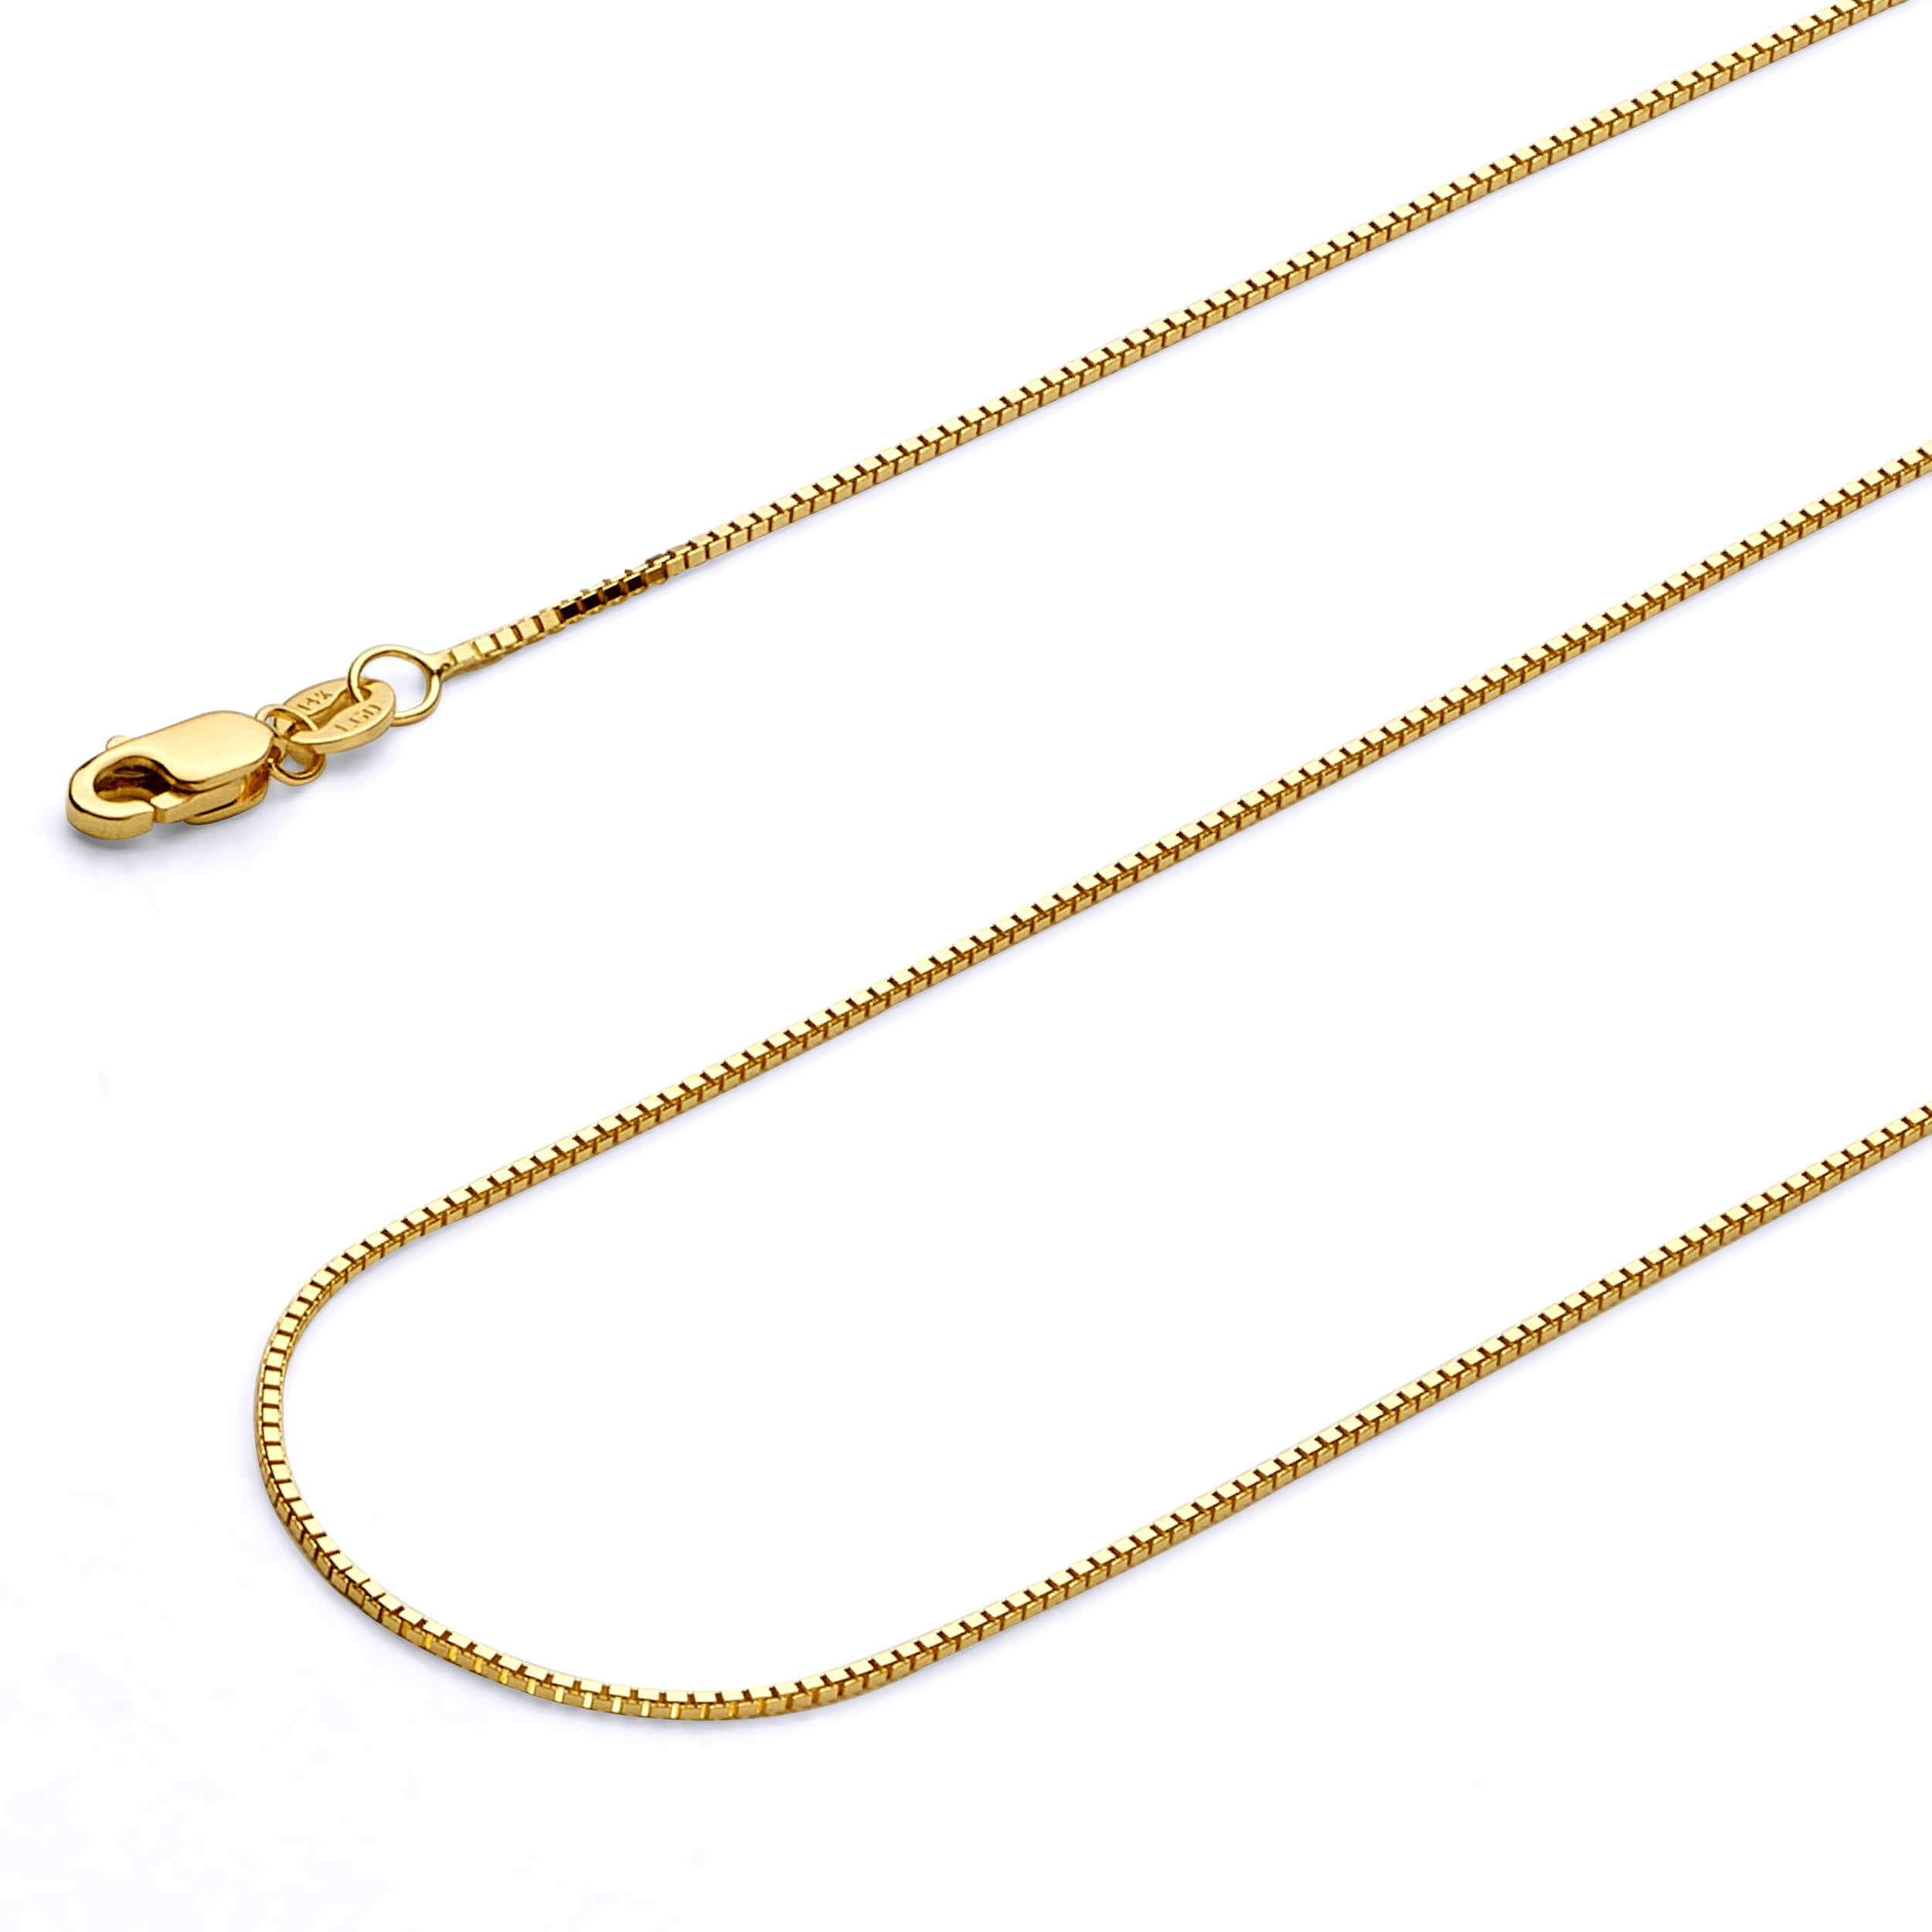 Wellingsale 14k Yellow Gold Polished 0.8mm Diamond Cut Round Wheat Chain Necklace with Spring Ring Clasp